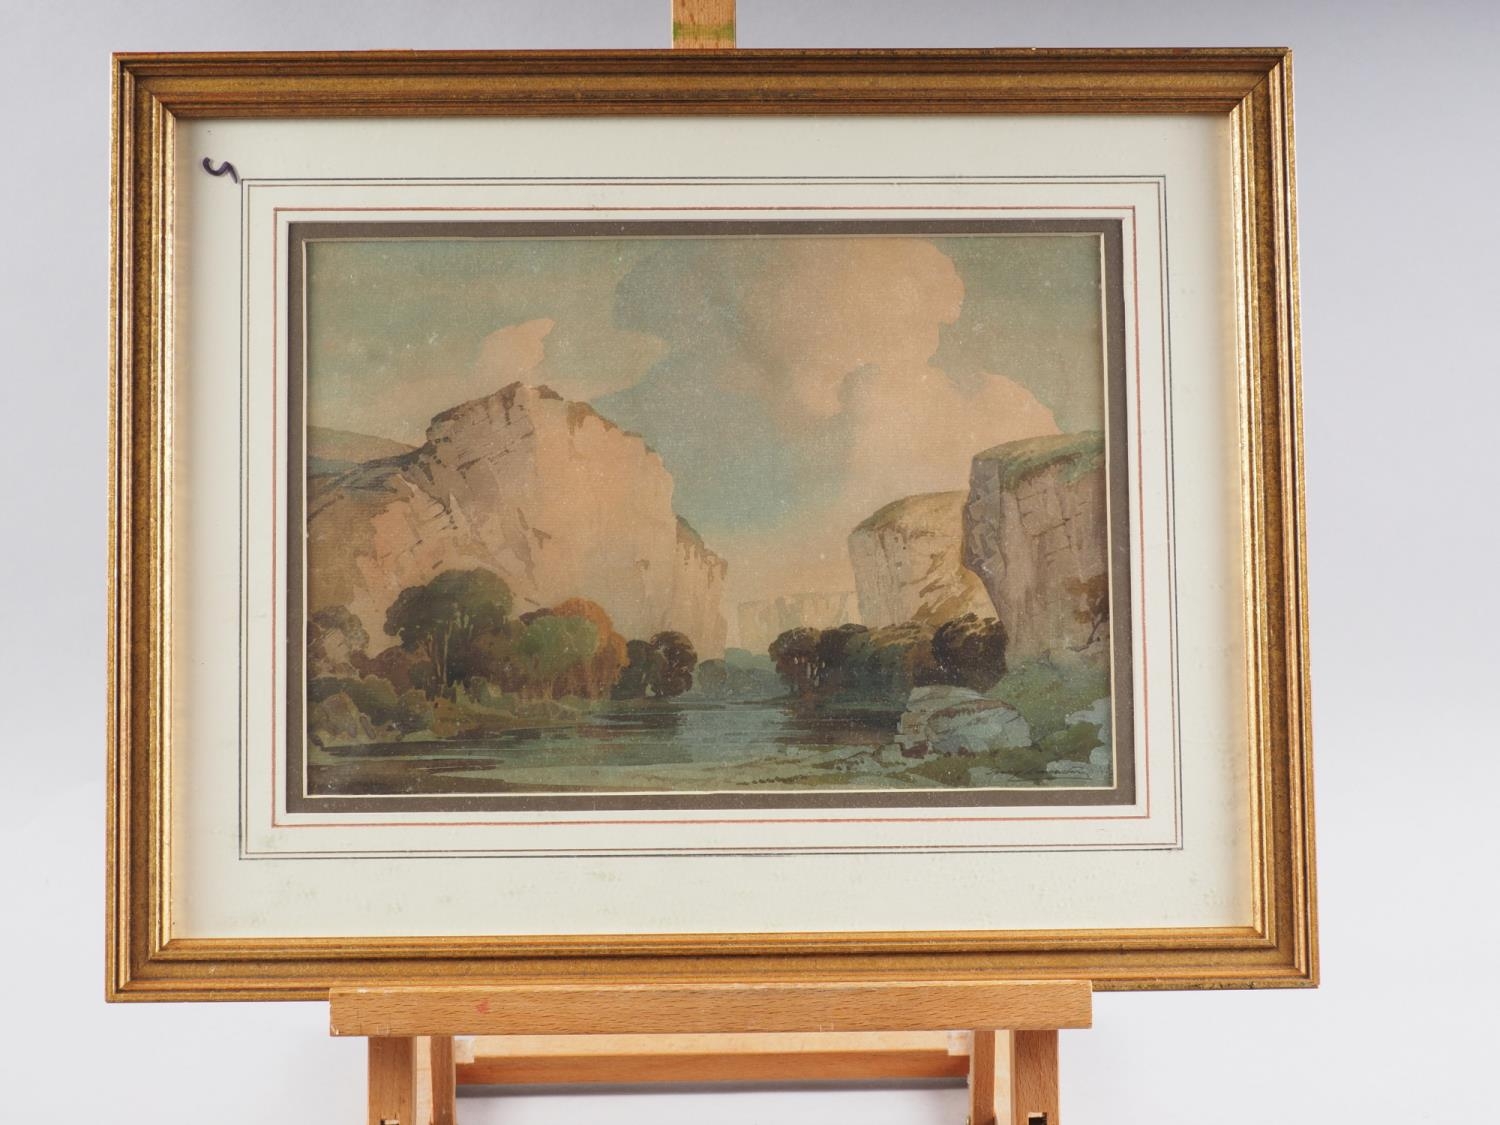 Percy Lancaster: watercolours, river landscape with gorge and cliffs, 9" x 13", in gilt frame, and